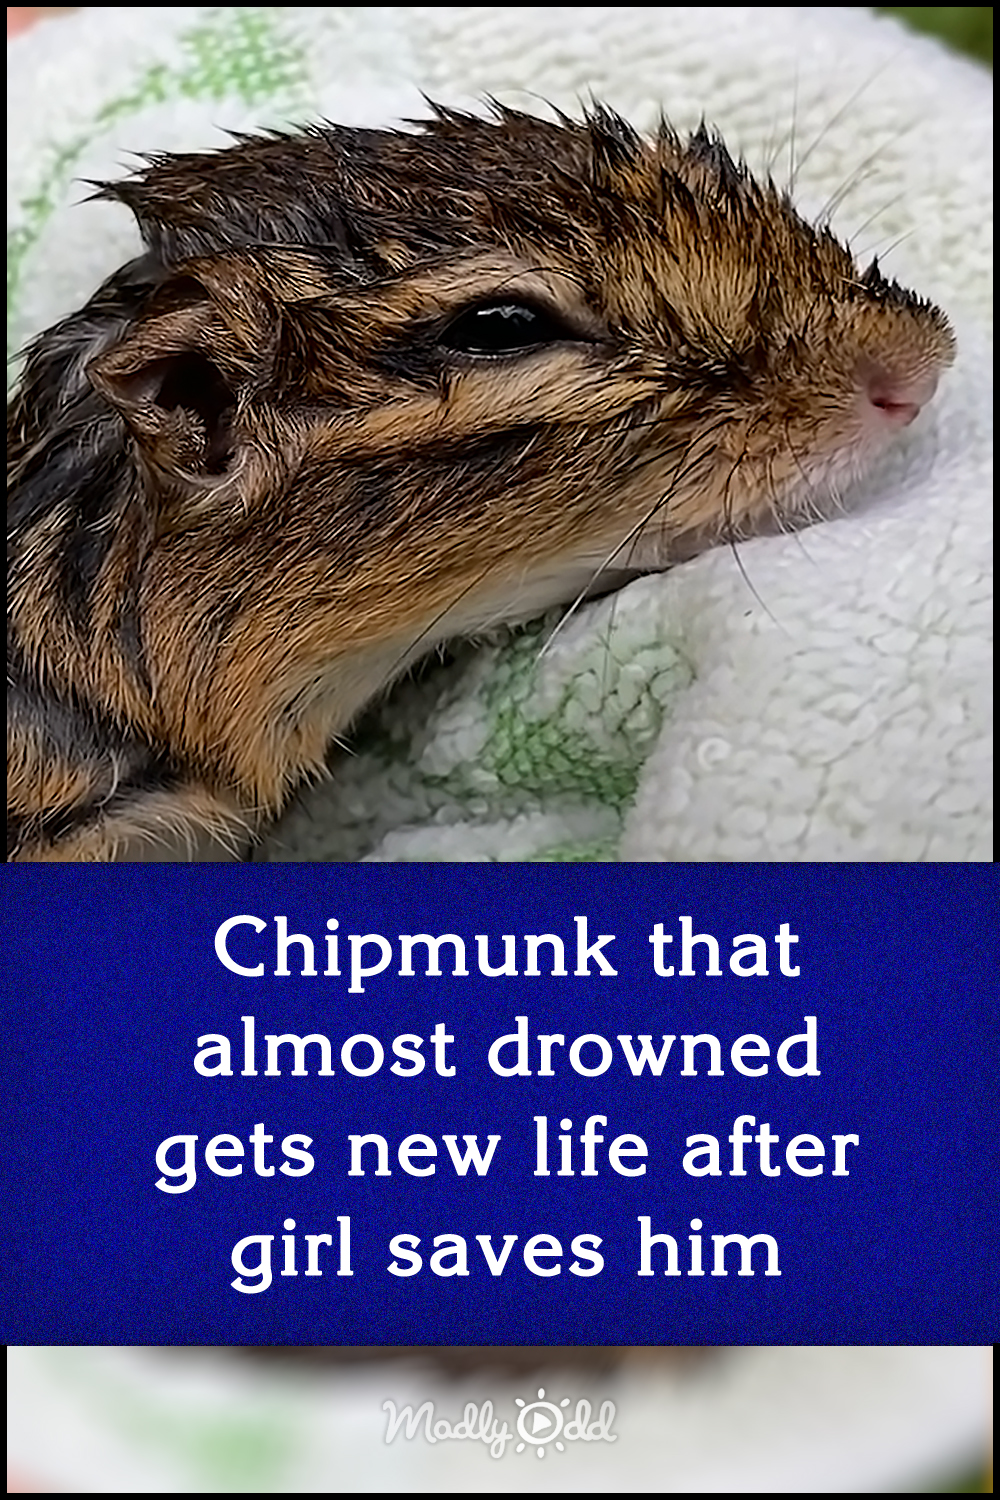 Chipmunk that almost drowned gets new life after girl saves him